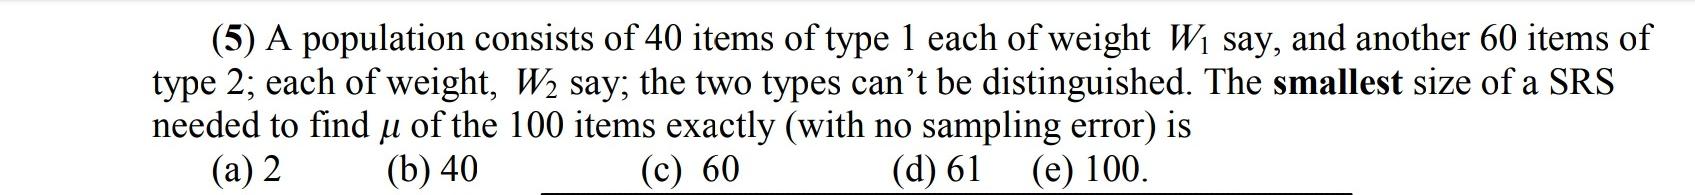 5 A Population Consists Of 40 Items Of Type 1 Each Of Weight W Say And Another 60 Items Of Type 2 Each Of Weight W2 1